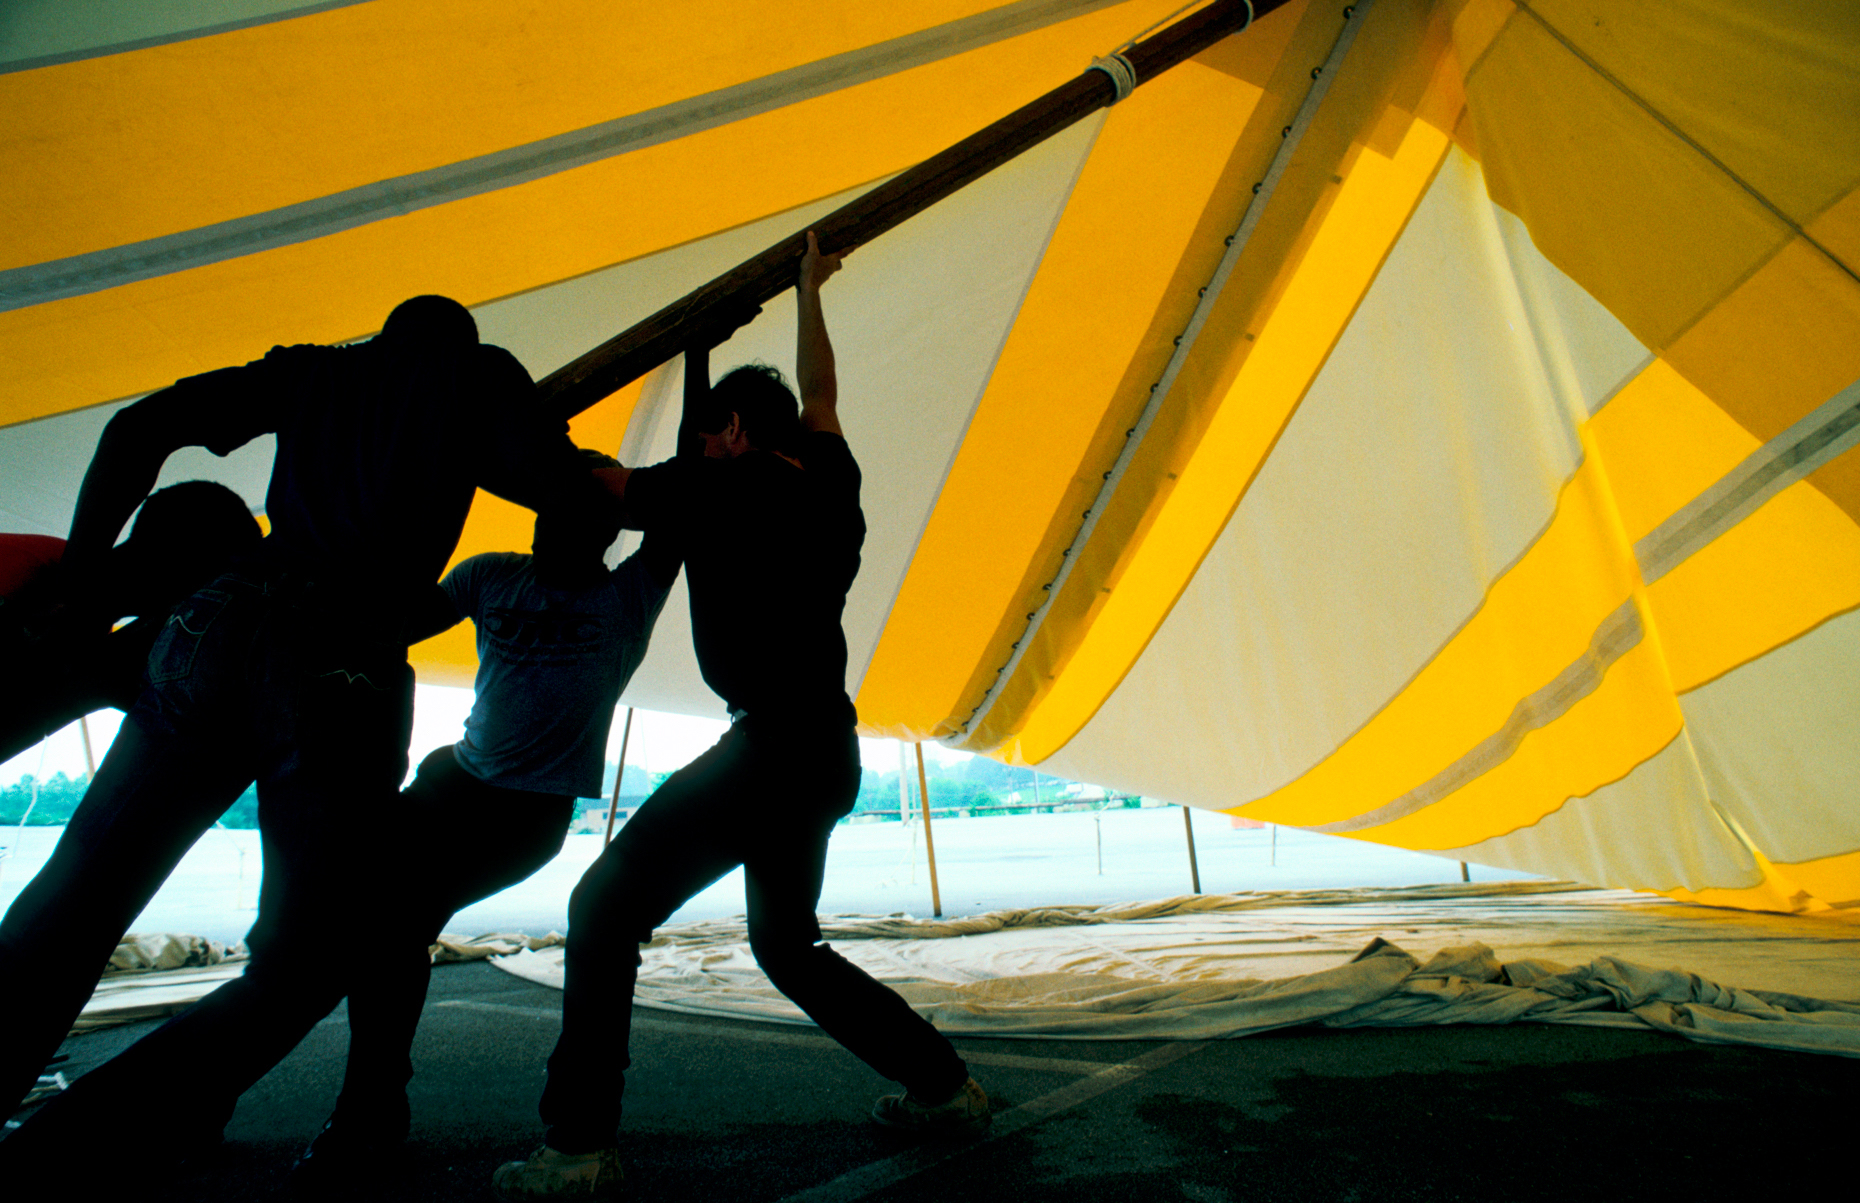 FOUR WORKERS STRUGGLE TO ERECT A LARGE YELLOW RENTAL TENT